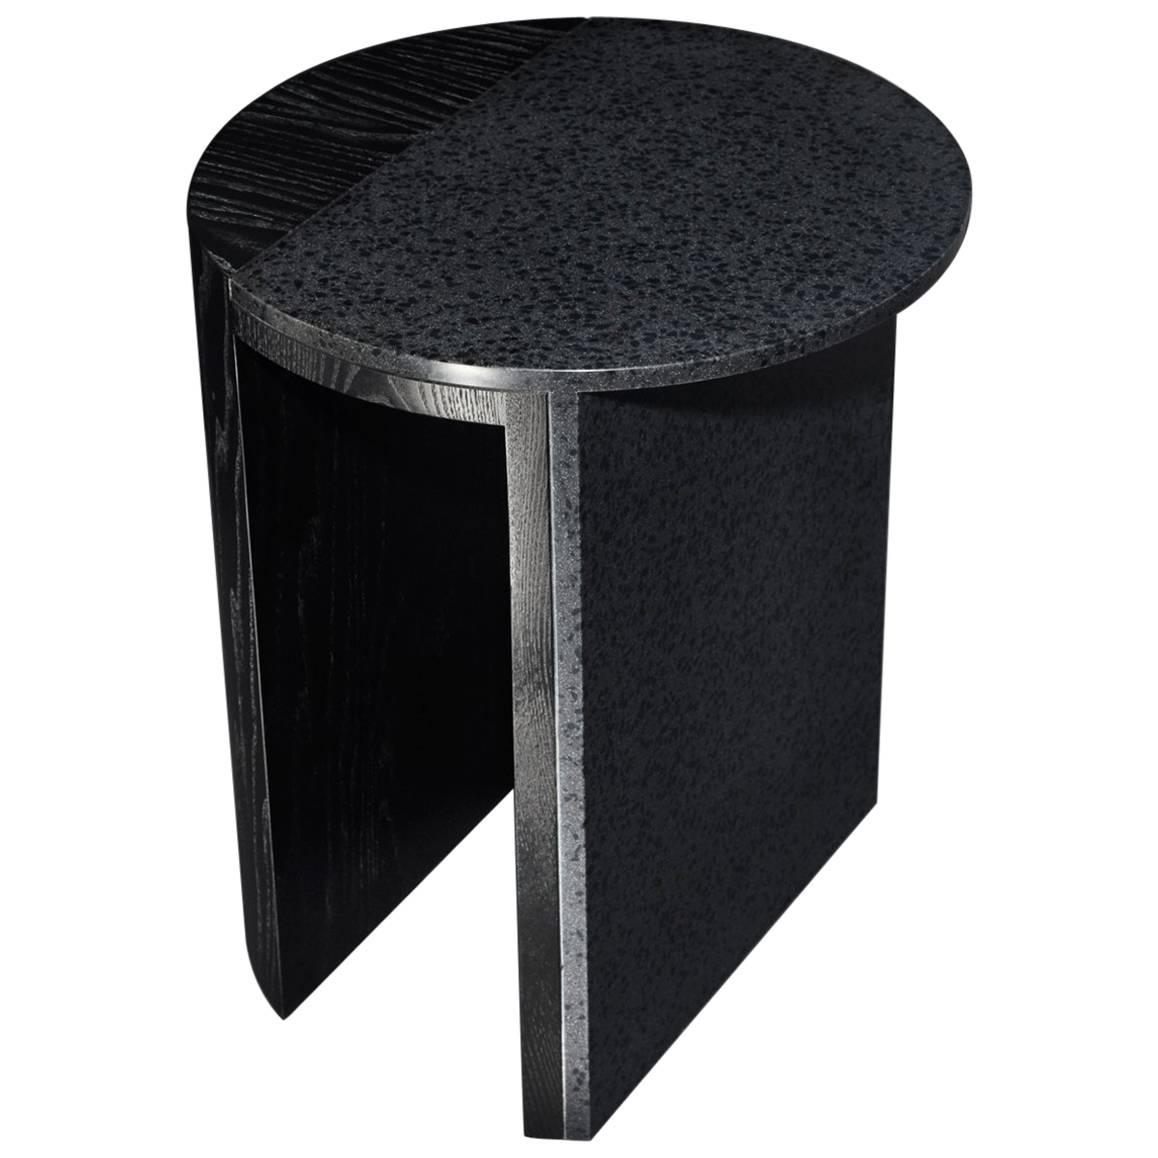 Gibbous Black Lava Side Table by Robert Sukrachand, Made in USA im Angebot